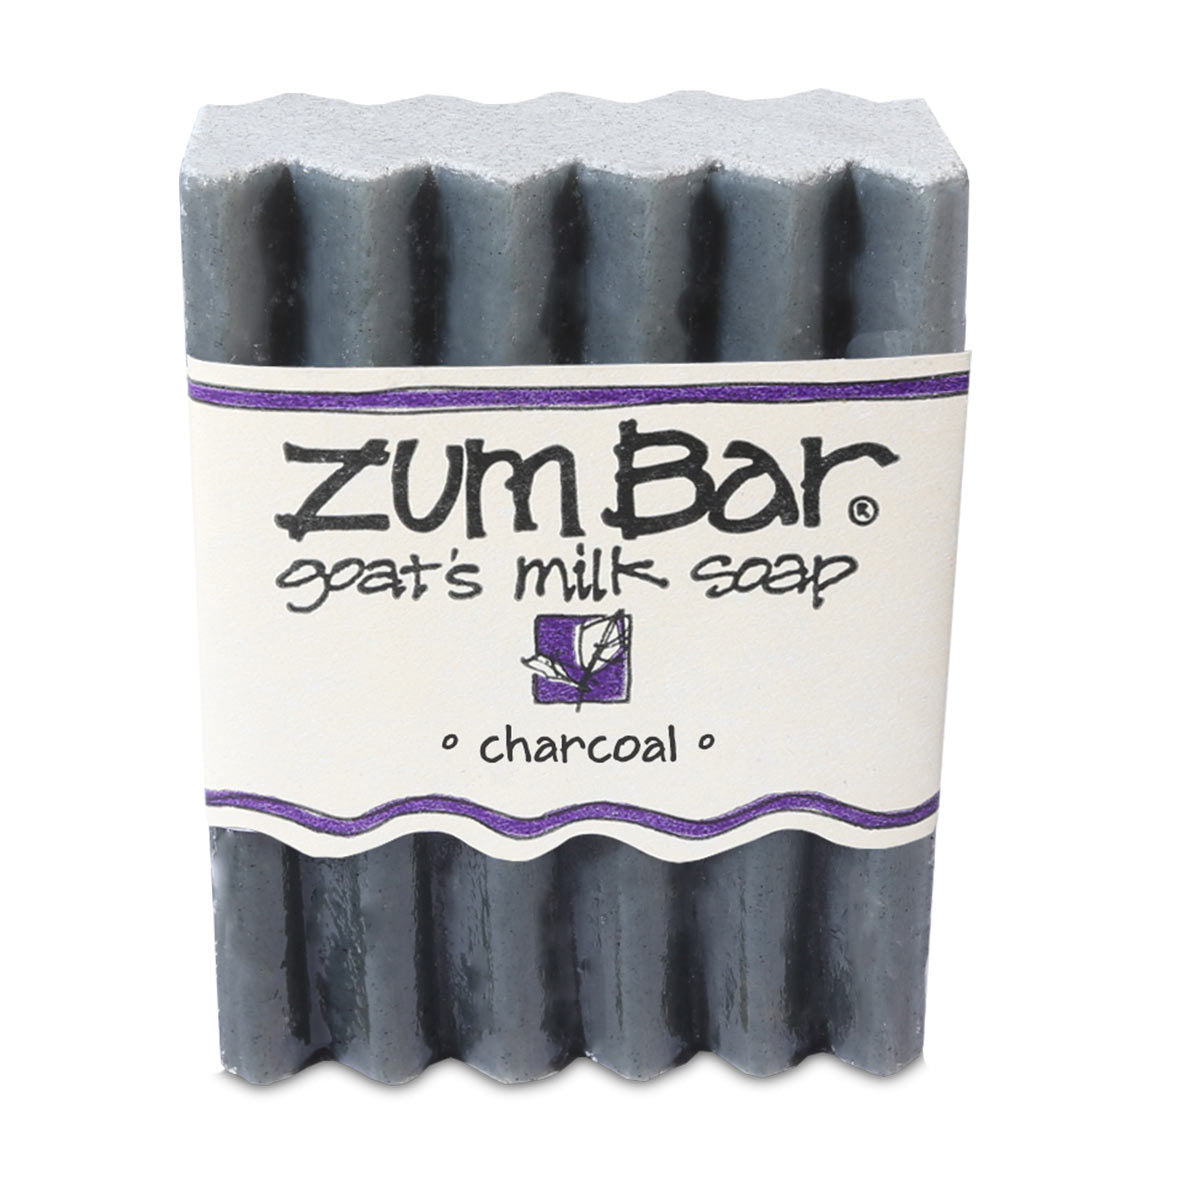 Primary image of Charcoal Zum Bar Soap